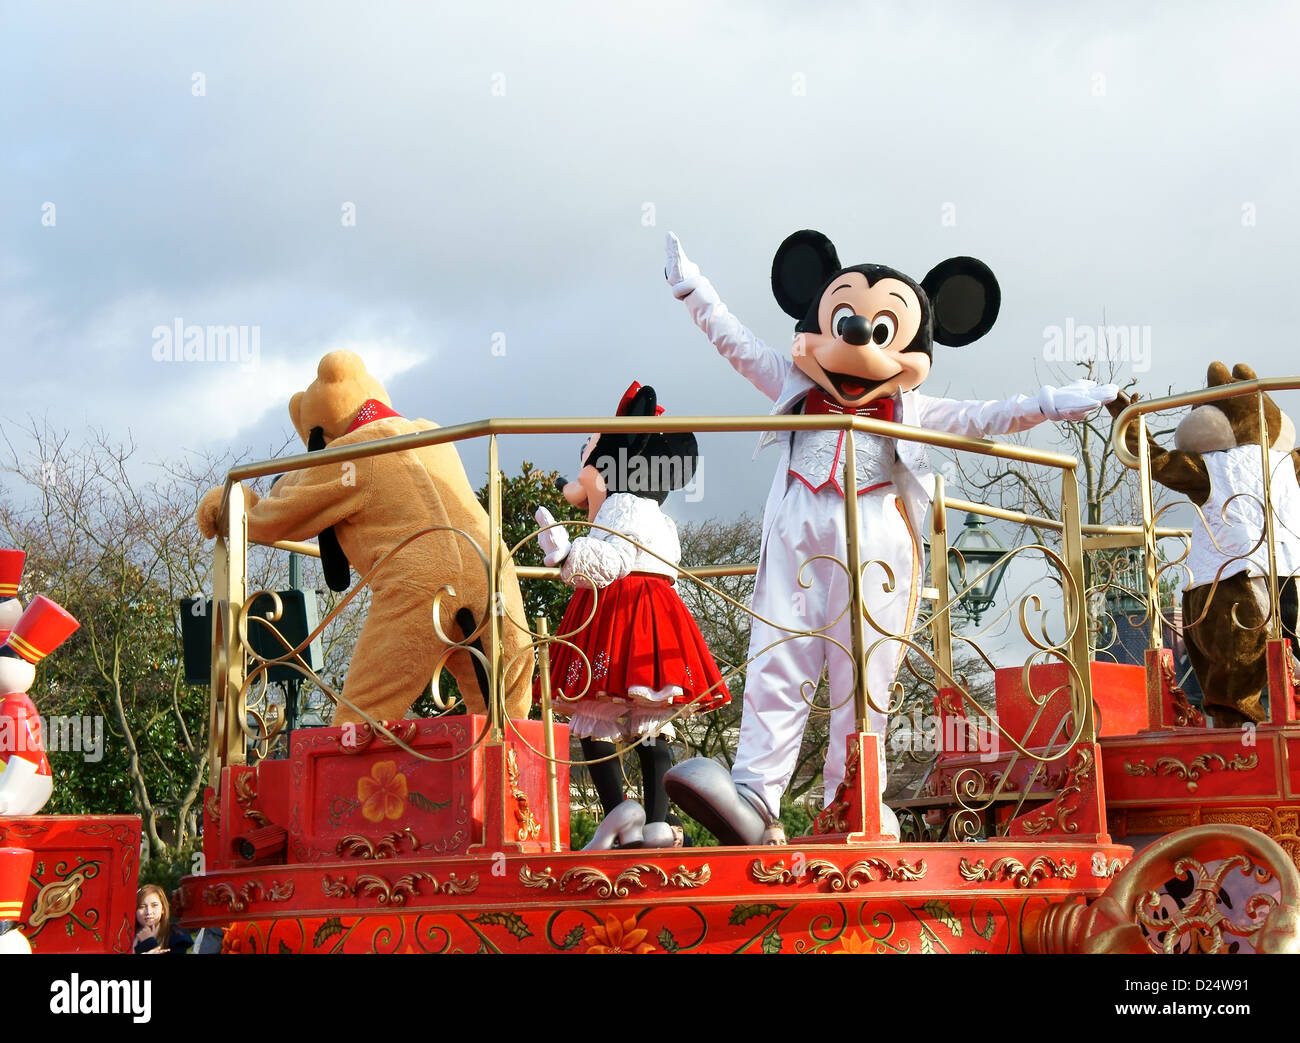 Mickey Mouse and other Disney characters waving to the crowd during the Disney Parade in Disneyland, Paris, France Stock Photo